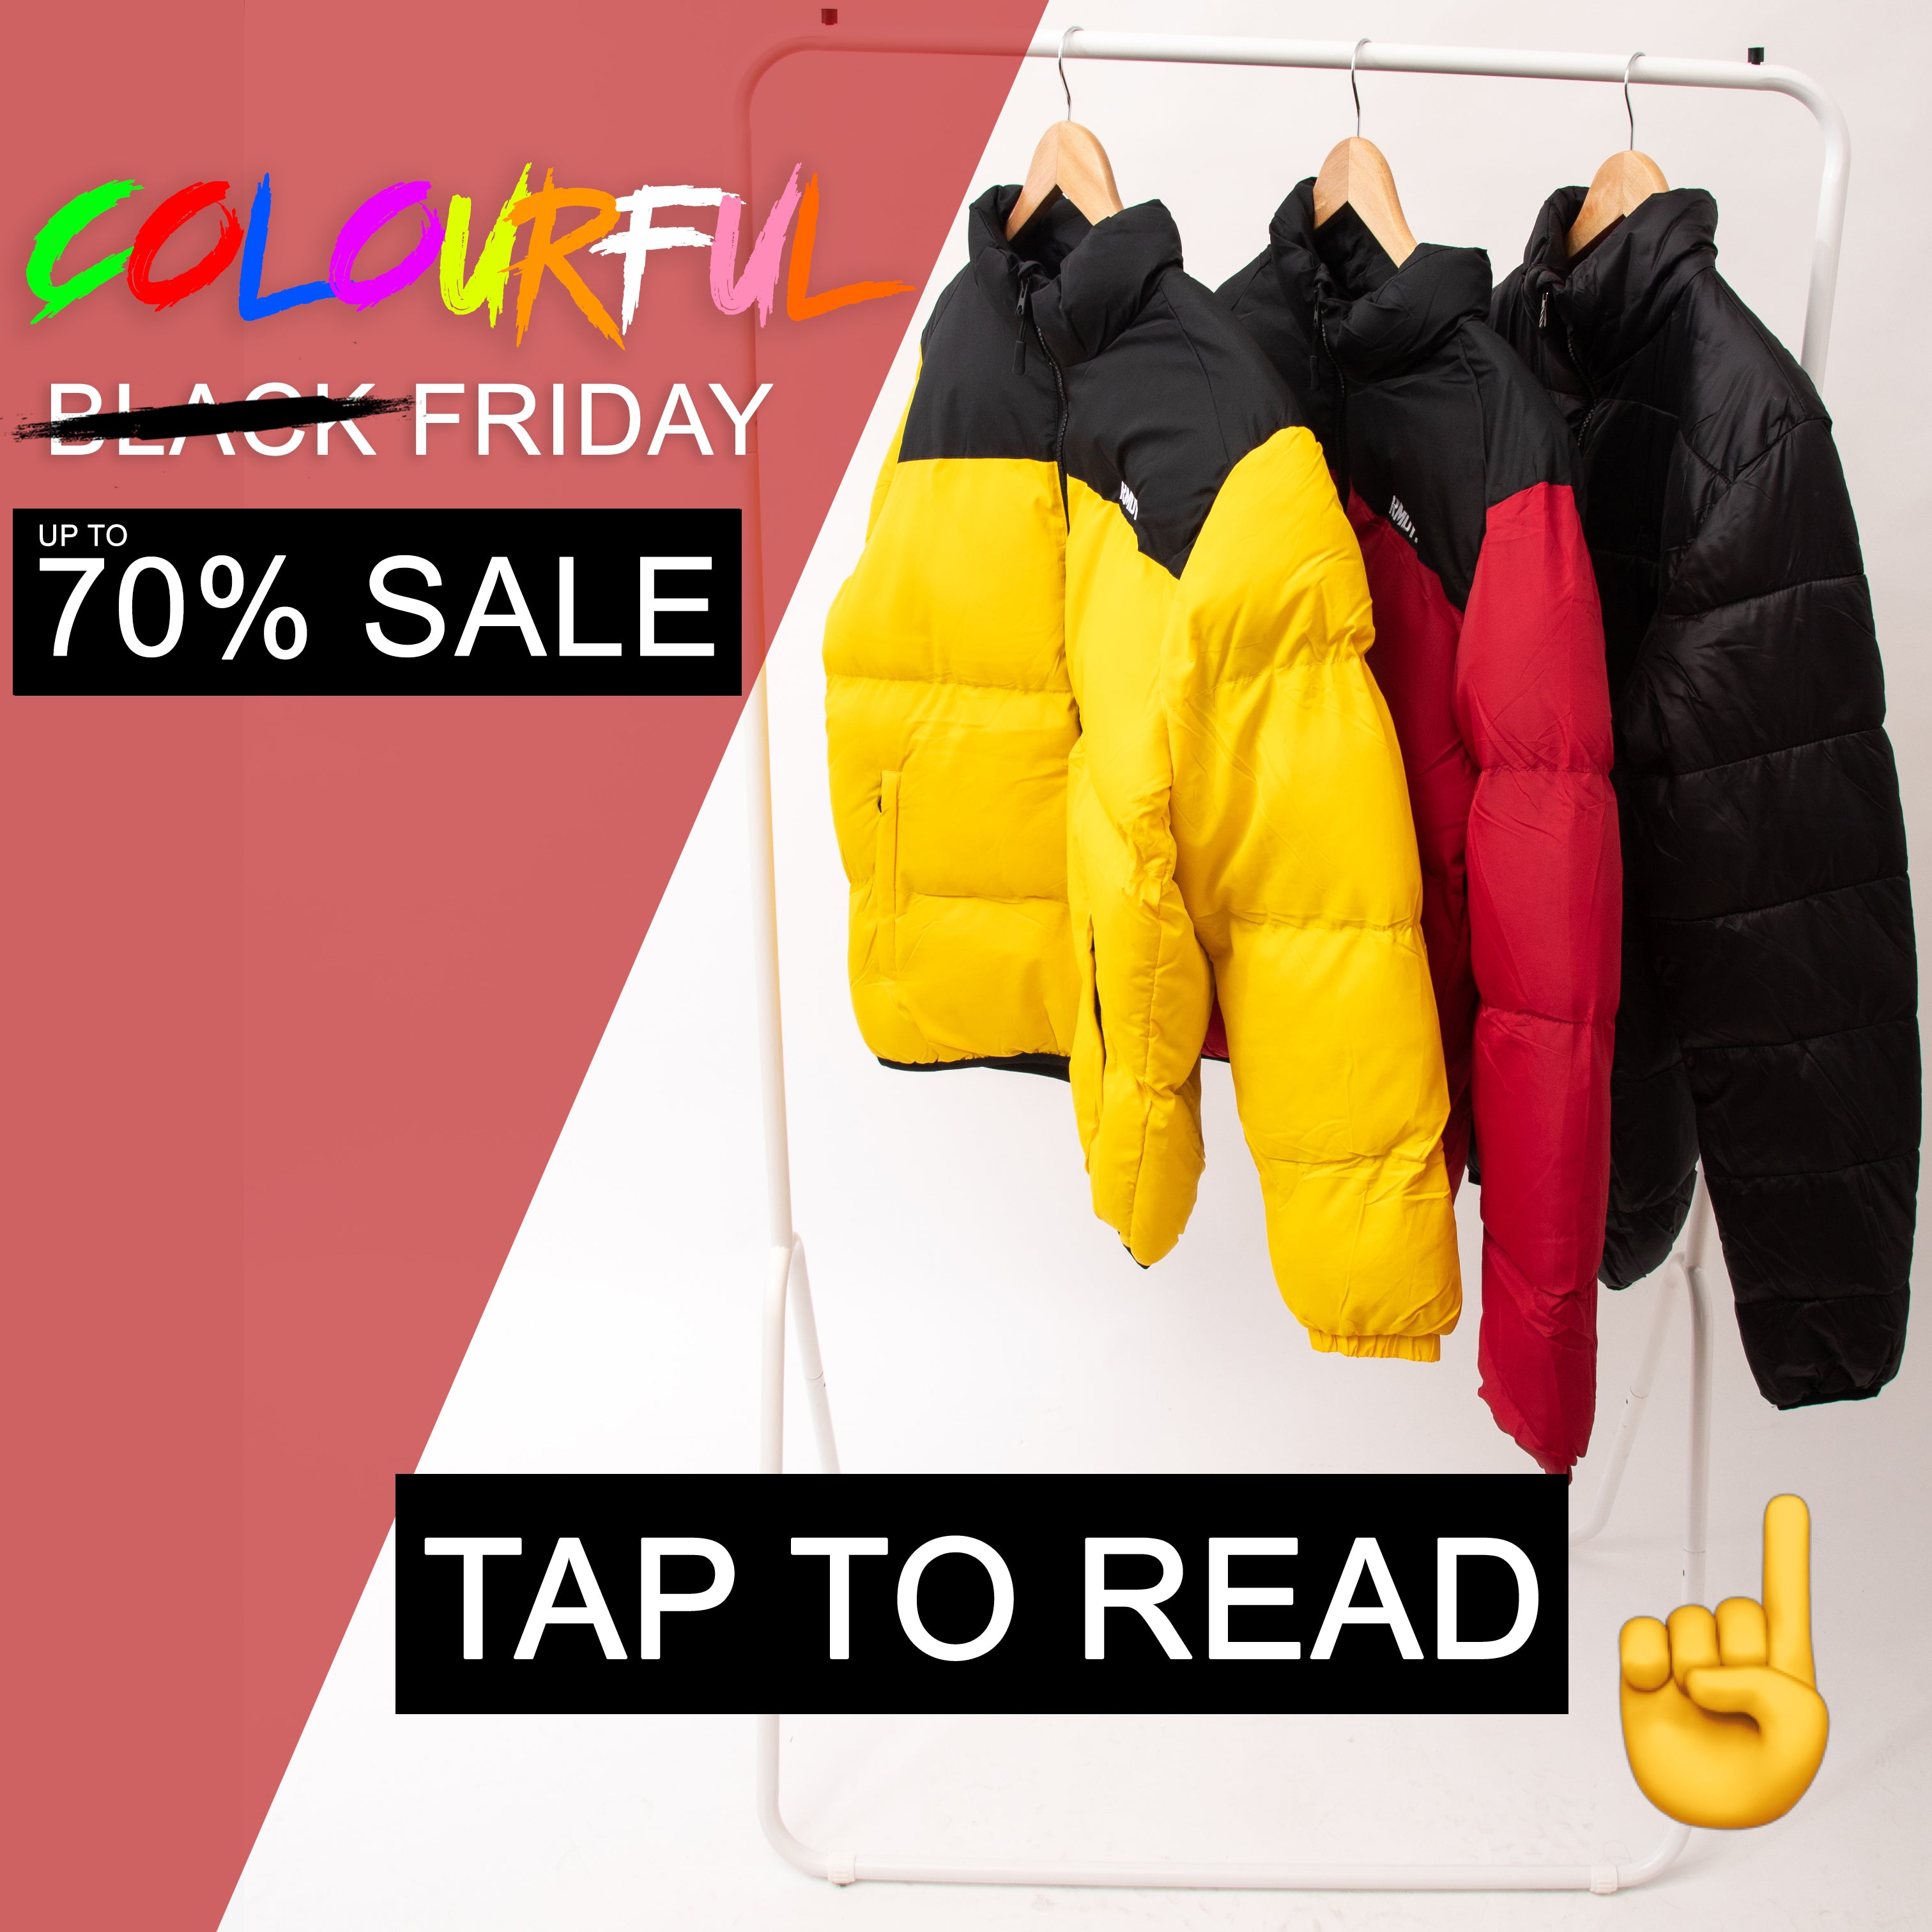 UP TO 70% OFF "COLOURFUL FRIDAY" SALE NOW ON